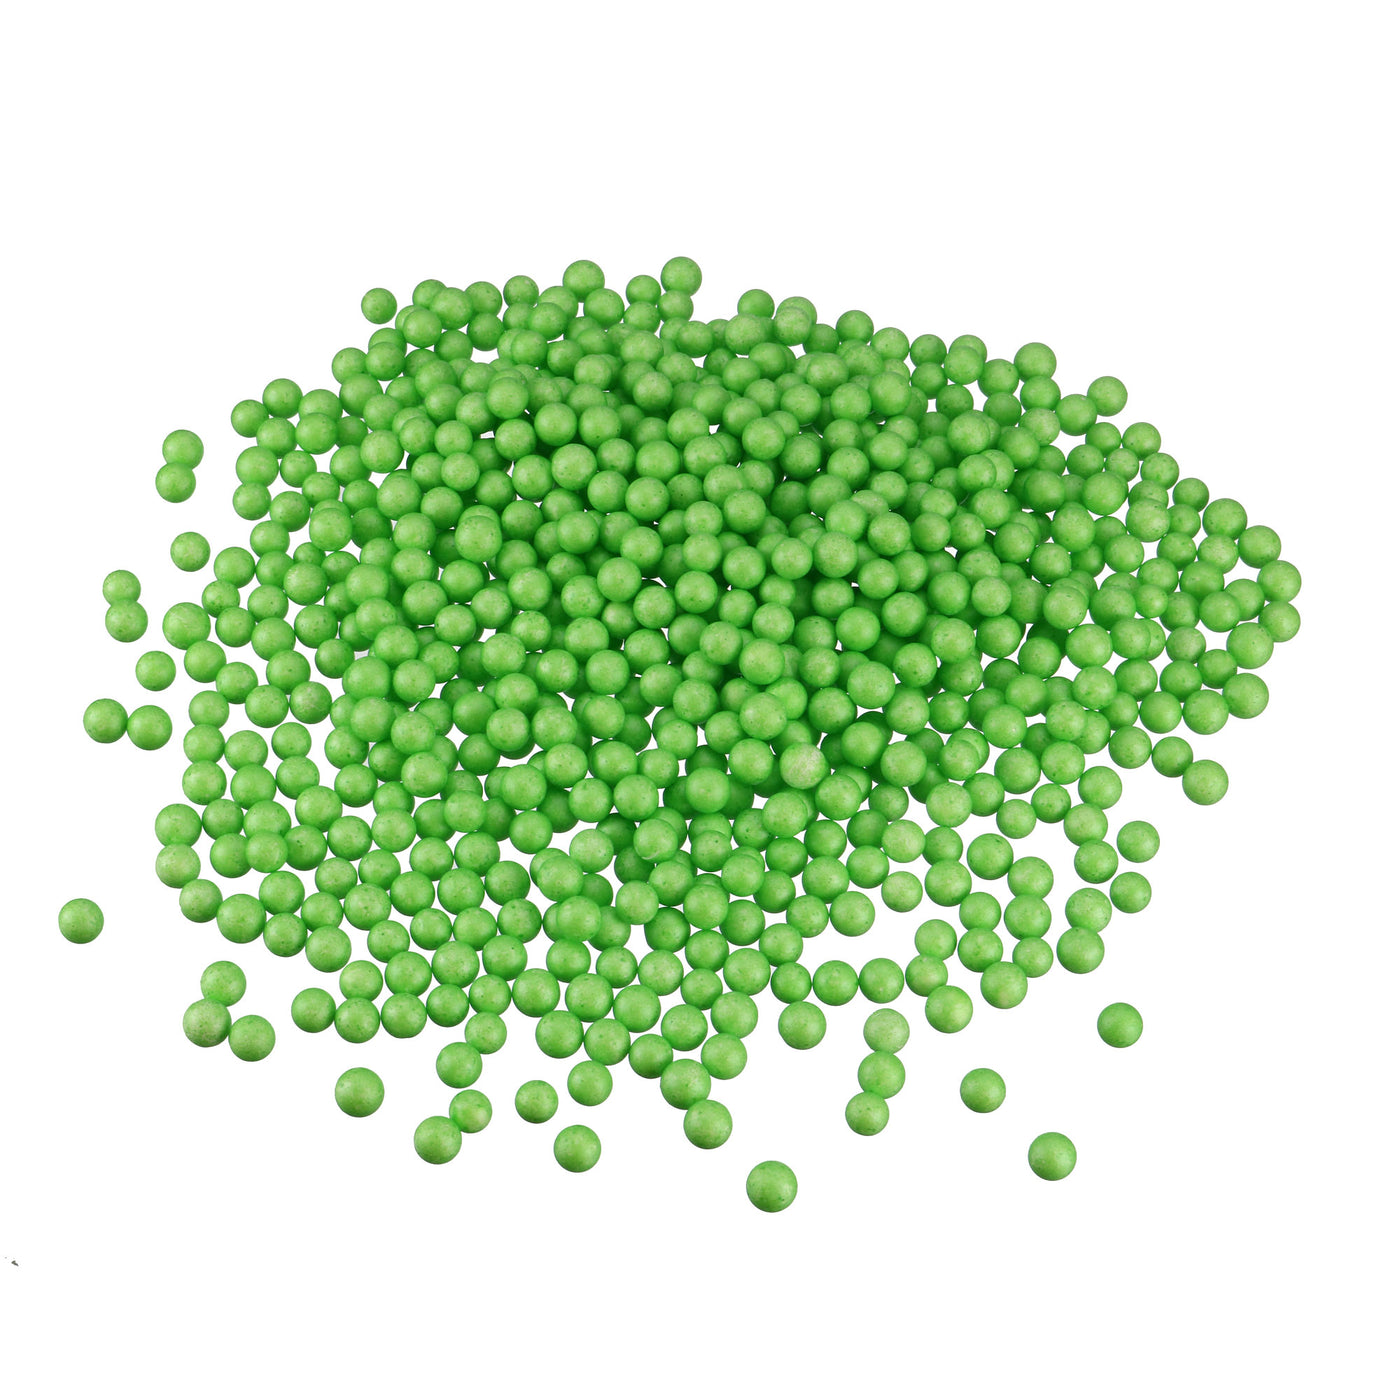 Uxcell Uxcell 4 Packs 0.1" Green Polystyrene Foam Ball Beads Mini for DIY Crafts, Fillings